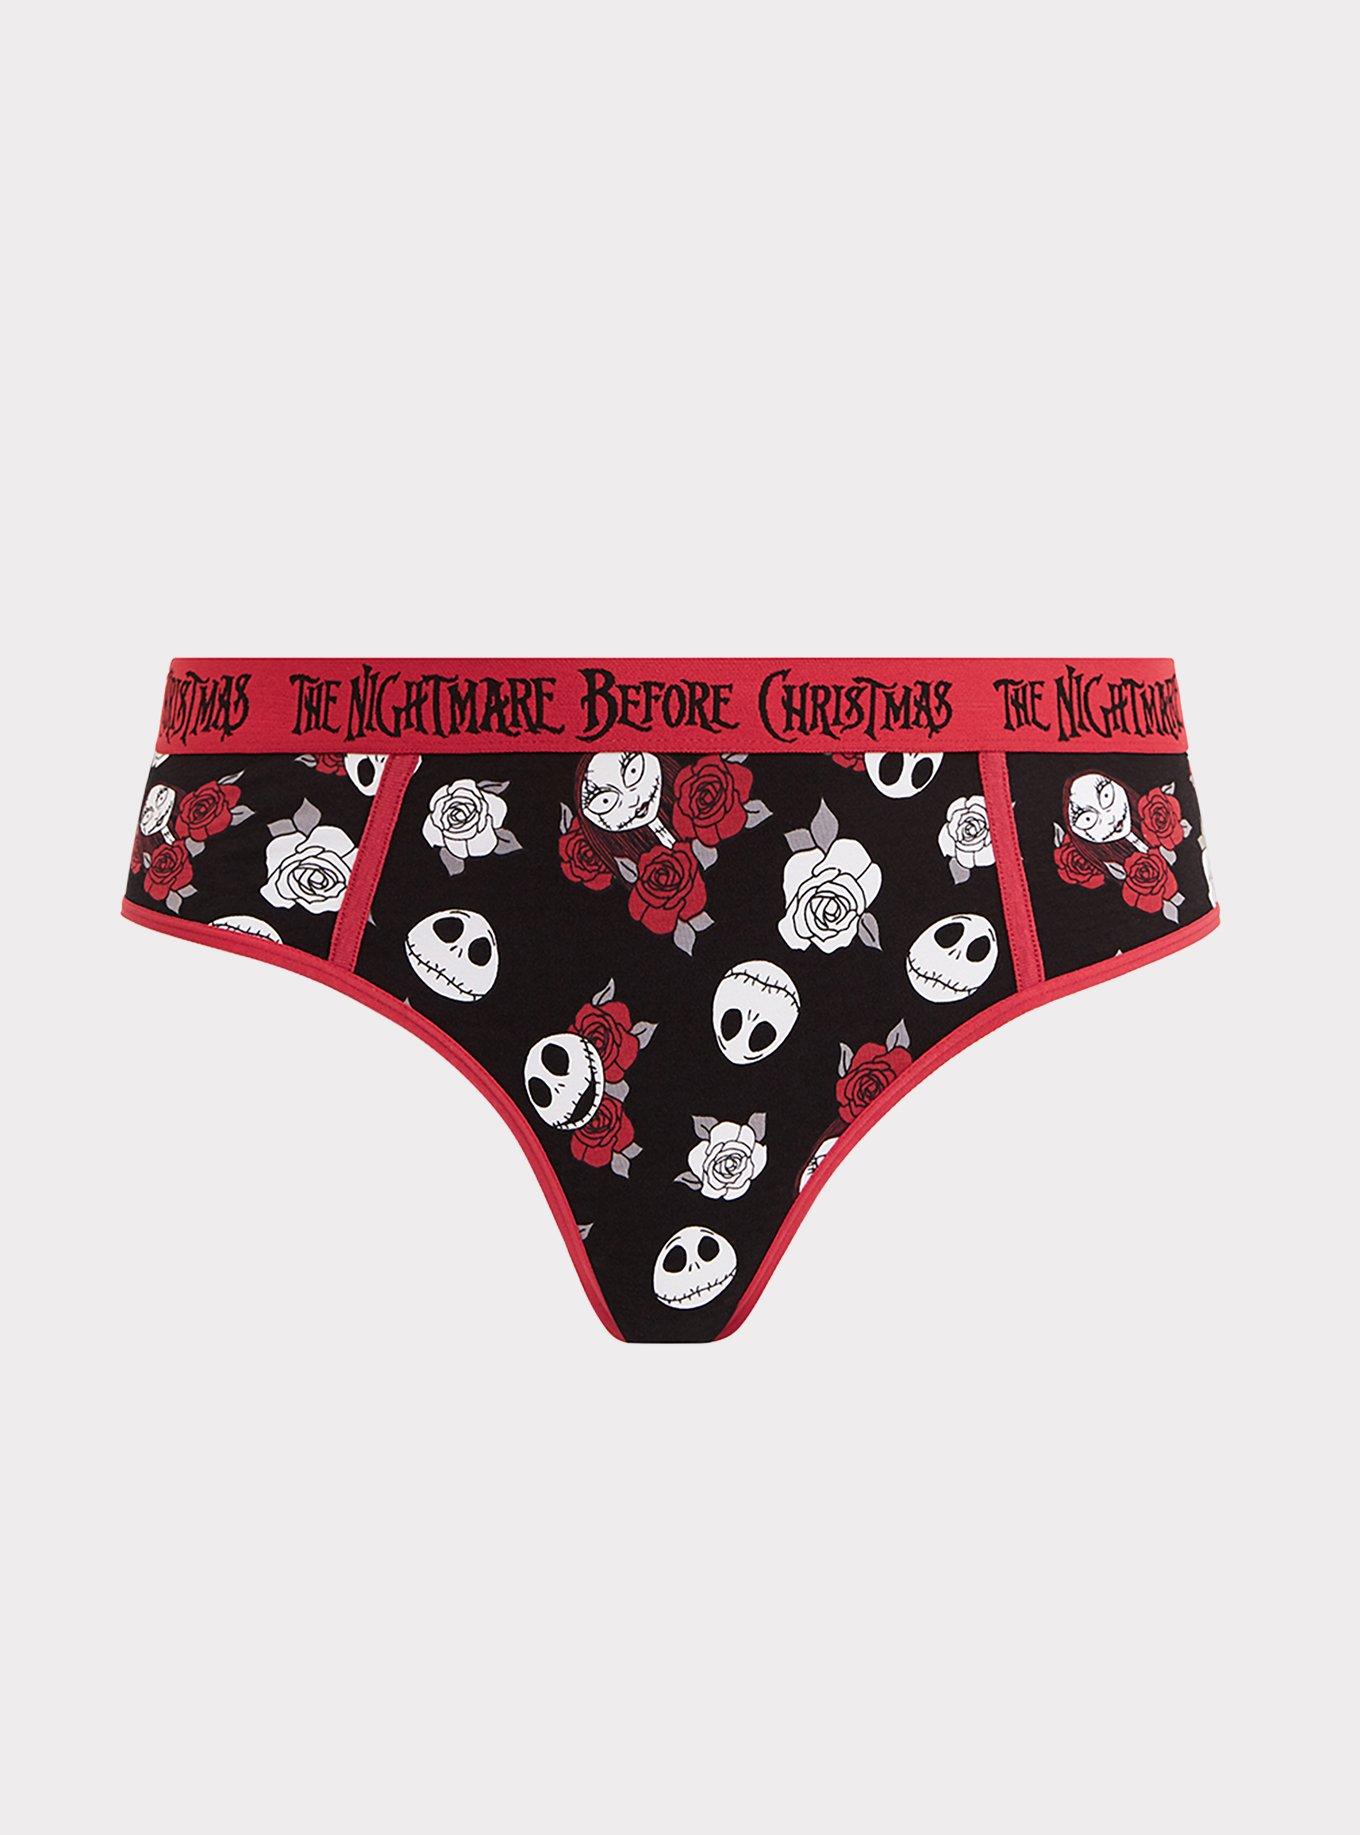 Plus Size - Disney The Nightmare Before Christmas Cotton Hipster Panty -  Torrid